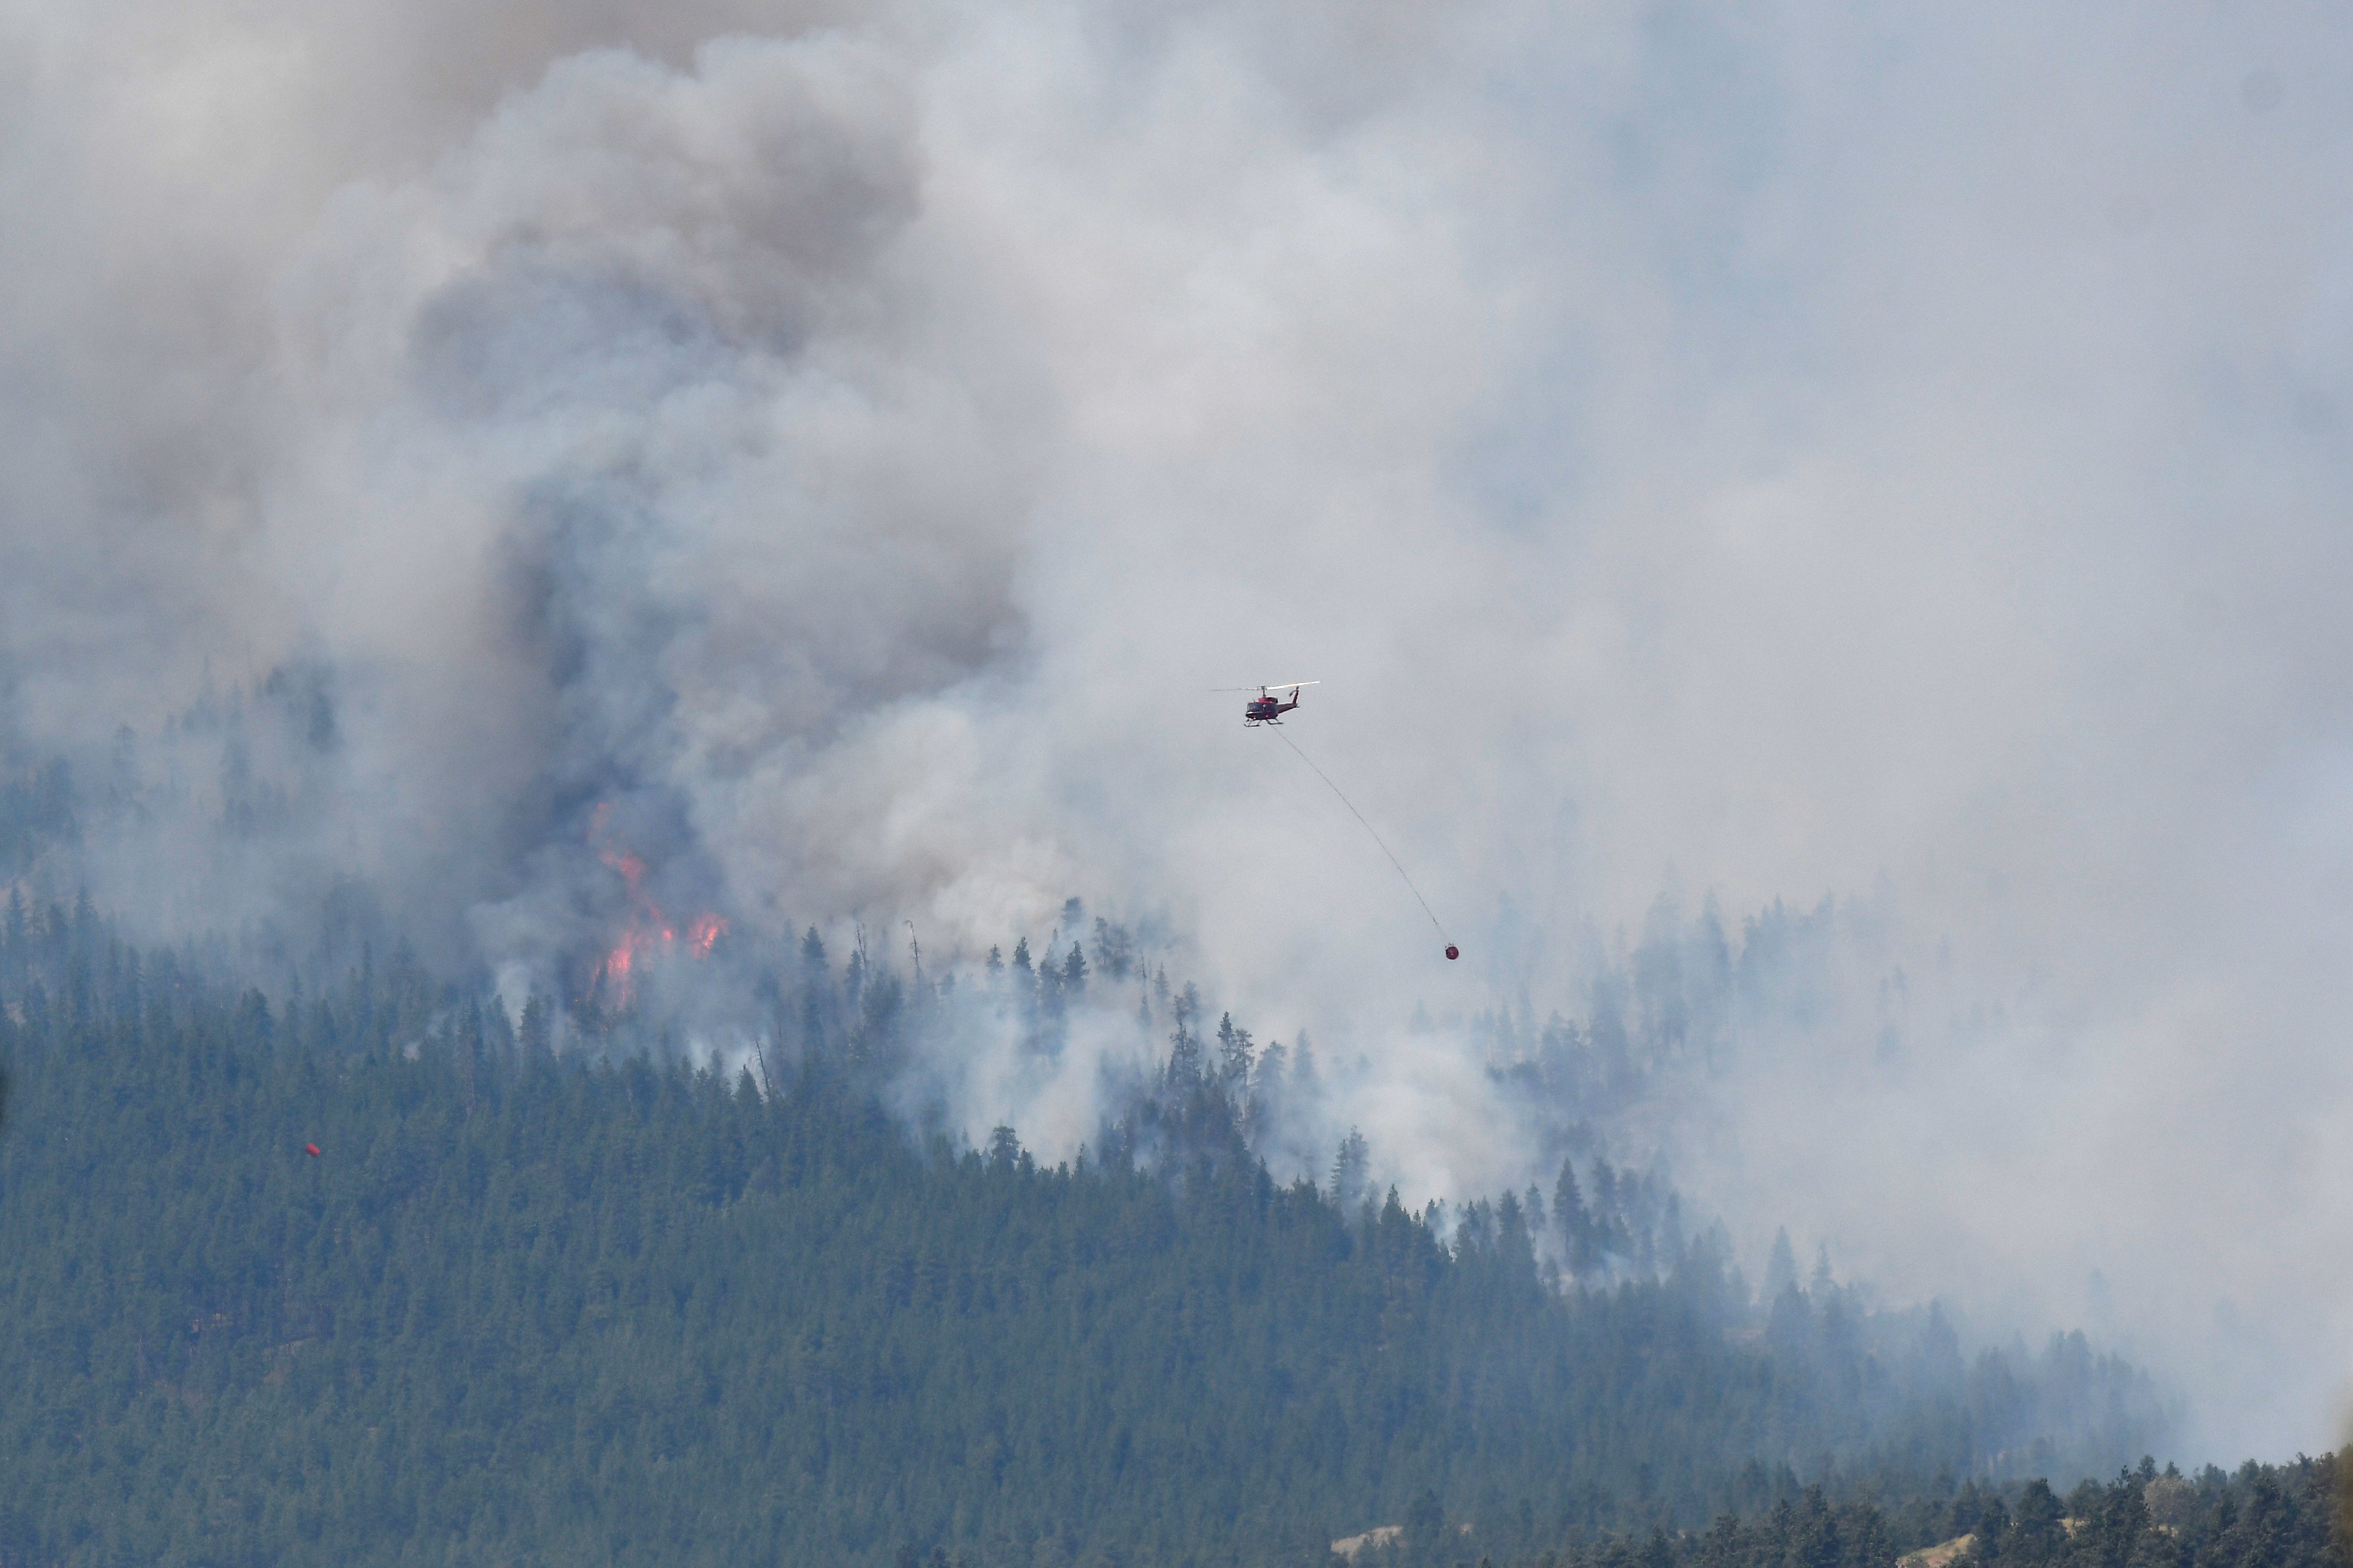 A wildfire burns on 1 July, 2021, outside the British Columbia town of Lytton, which has been gutted by flames.